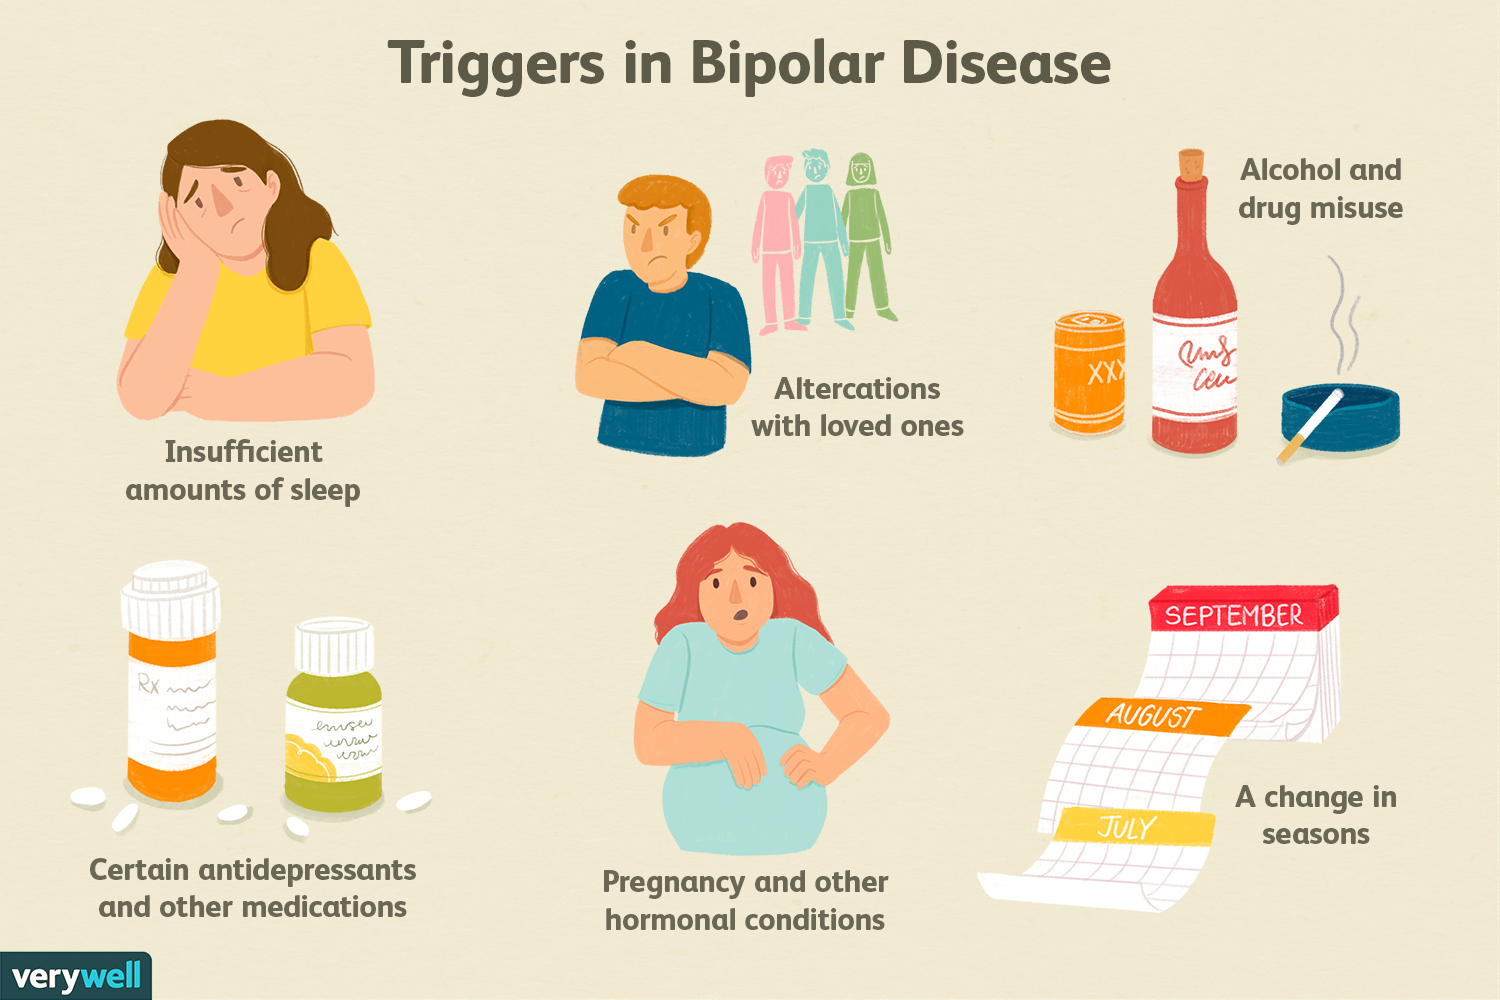 Symptoms of Bipolar Disorder: What Are the Symptoms of Bipolar Disorder?